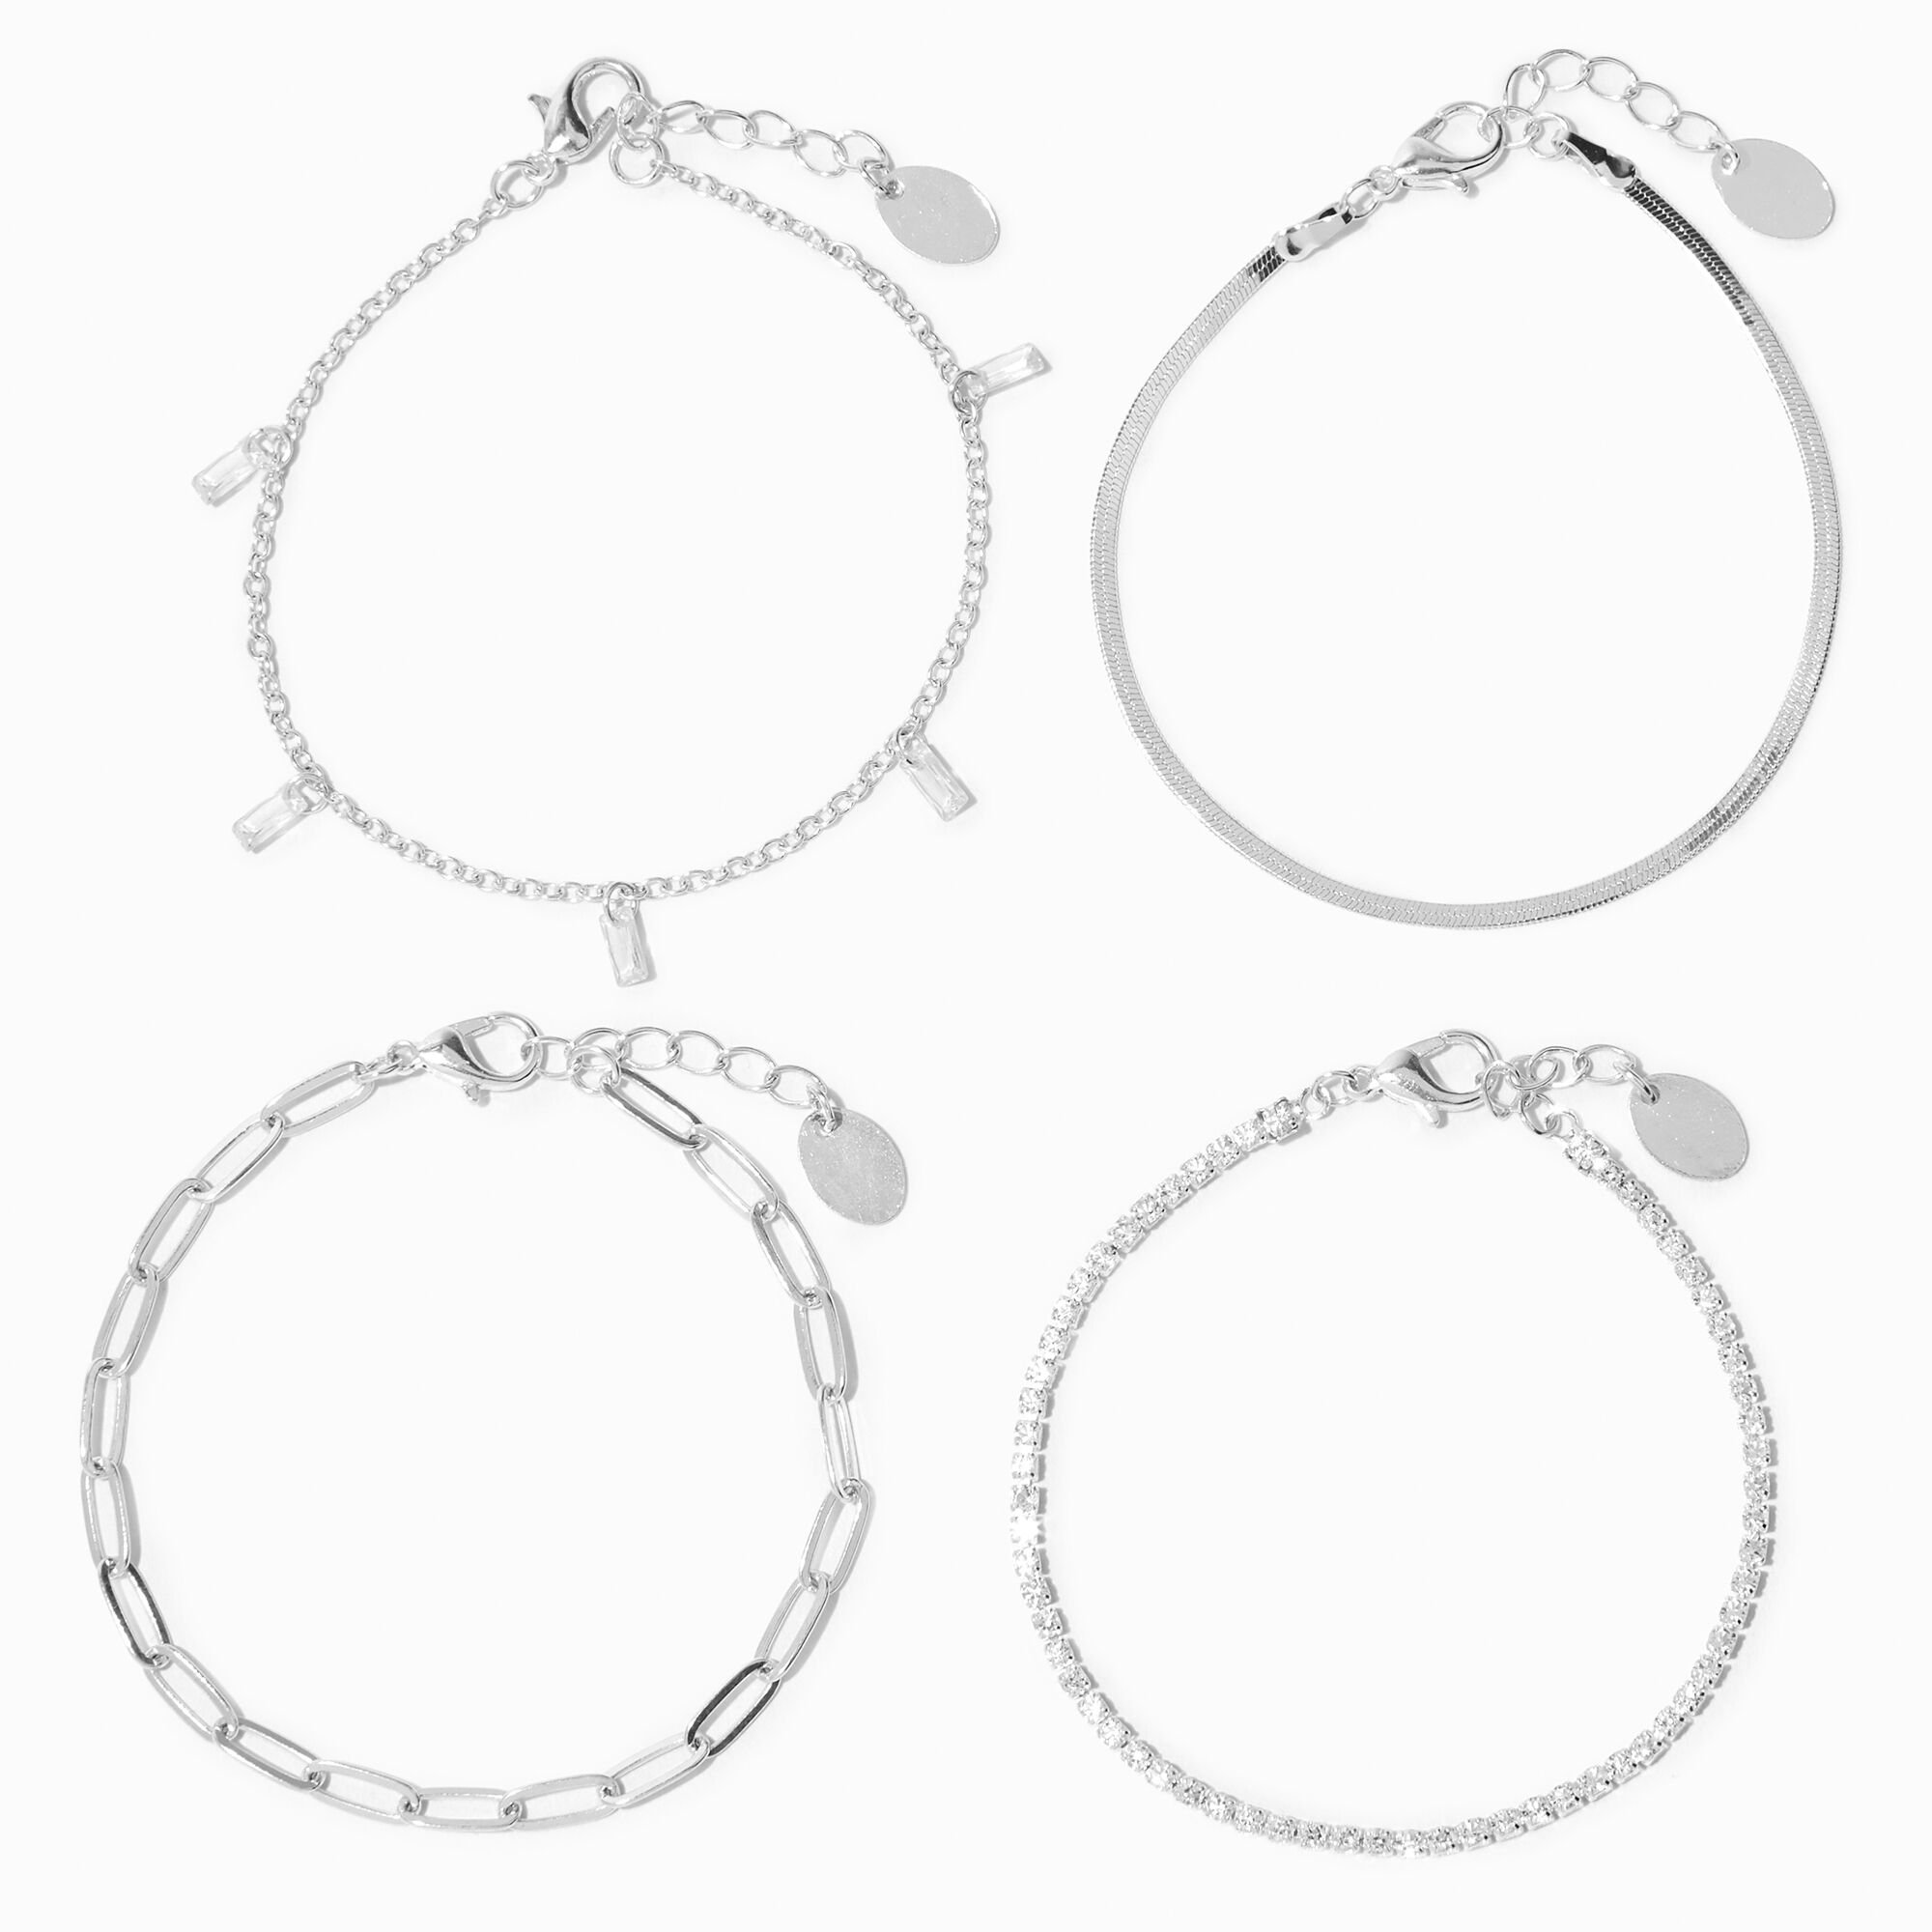 View Claires Tone Cubic Zirconia Woven Chain Bracelets 4 Pack Silver information